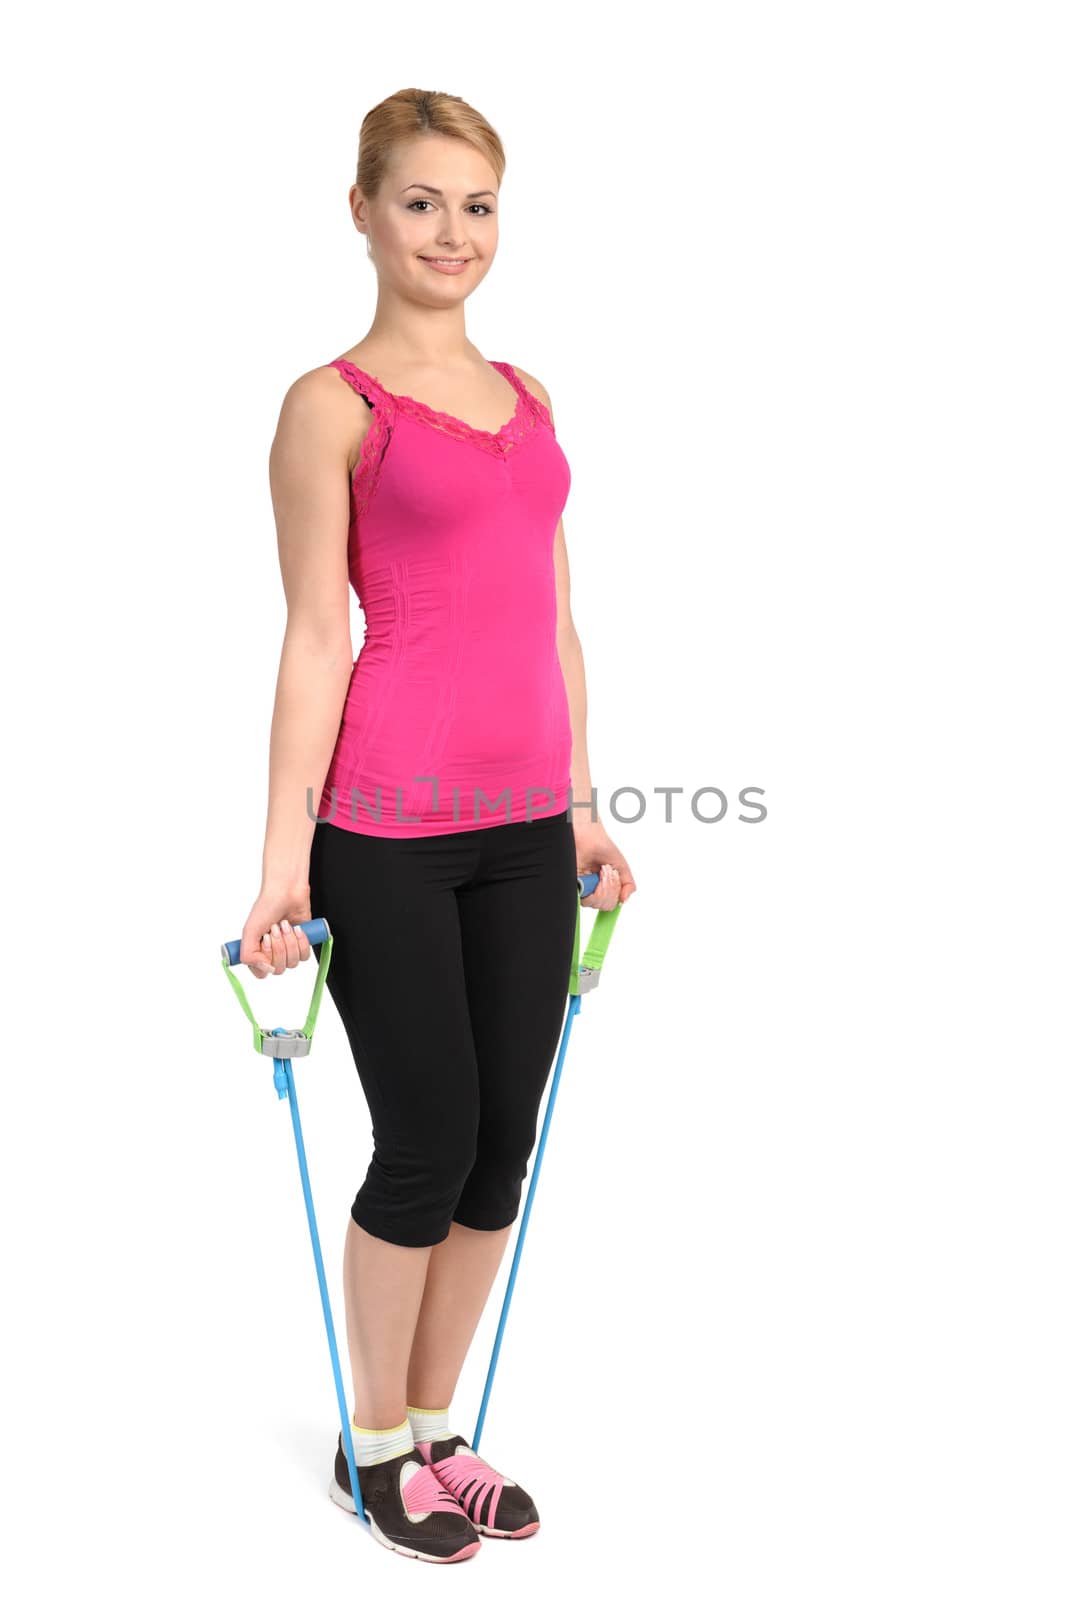 Female biceps exercise using rubber resistance band by starush